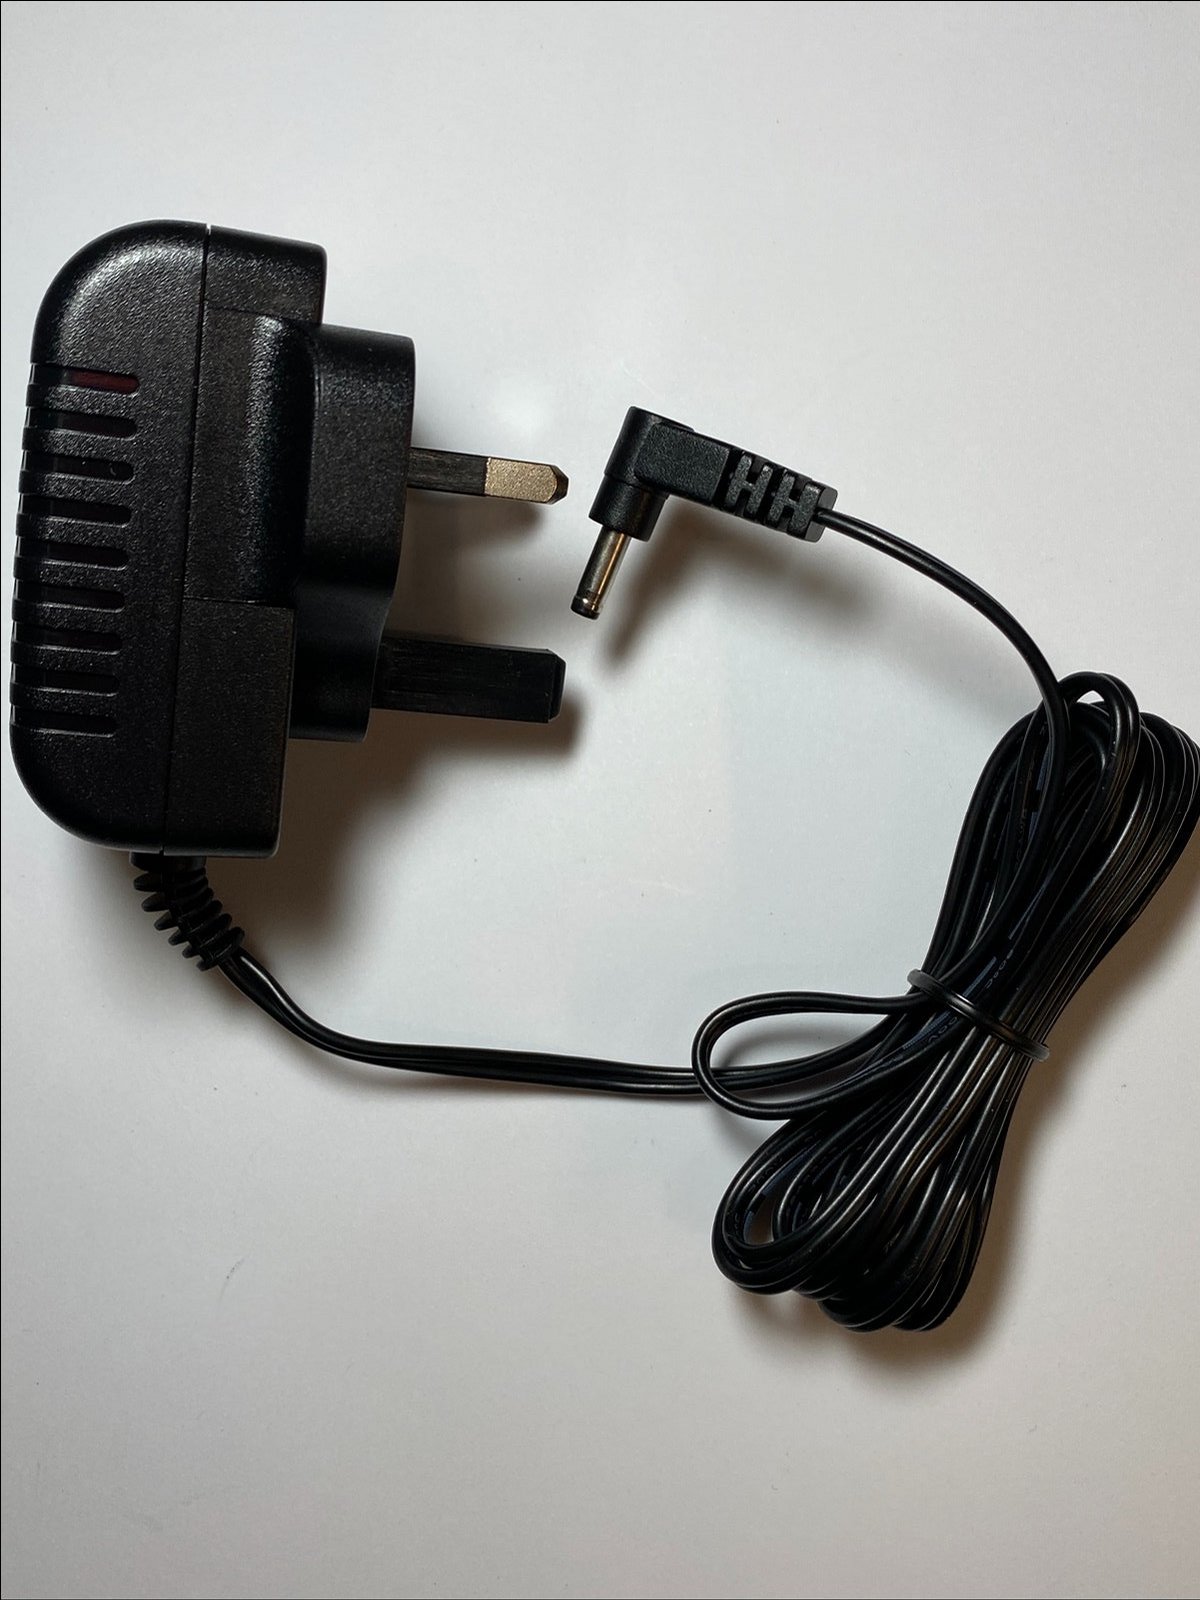 Replacement for 6V 1500mA AC Adaptor 4 BUSH Stereo DAB/FM Radio 1507 553/5927 Type: Power Adapter Max. Output Power: